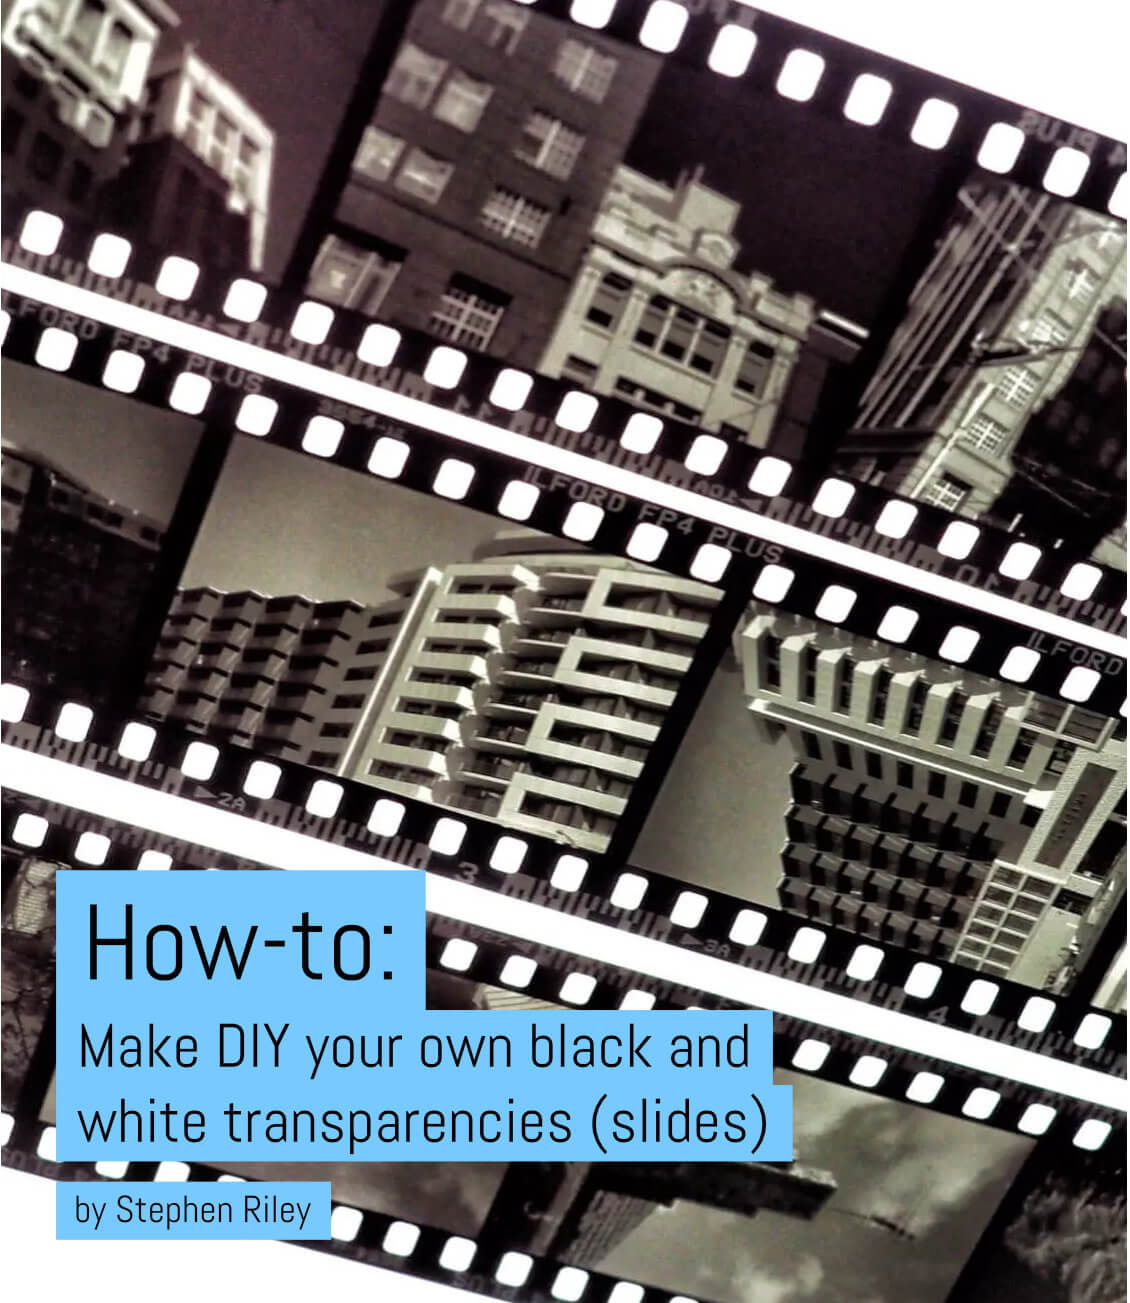 How-to: Make DIY your own black and white transparencies (slides)